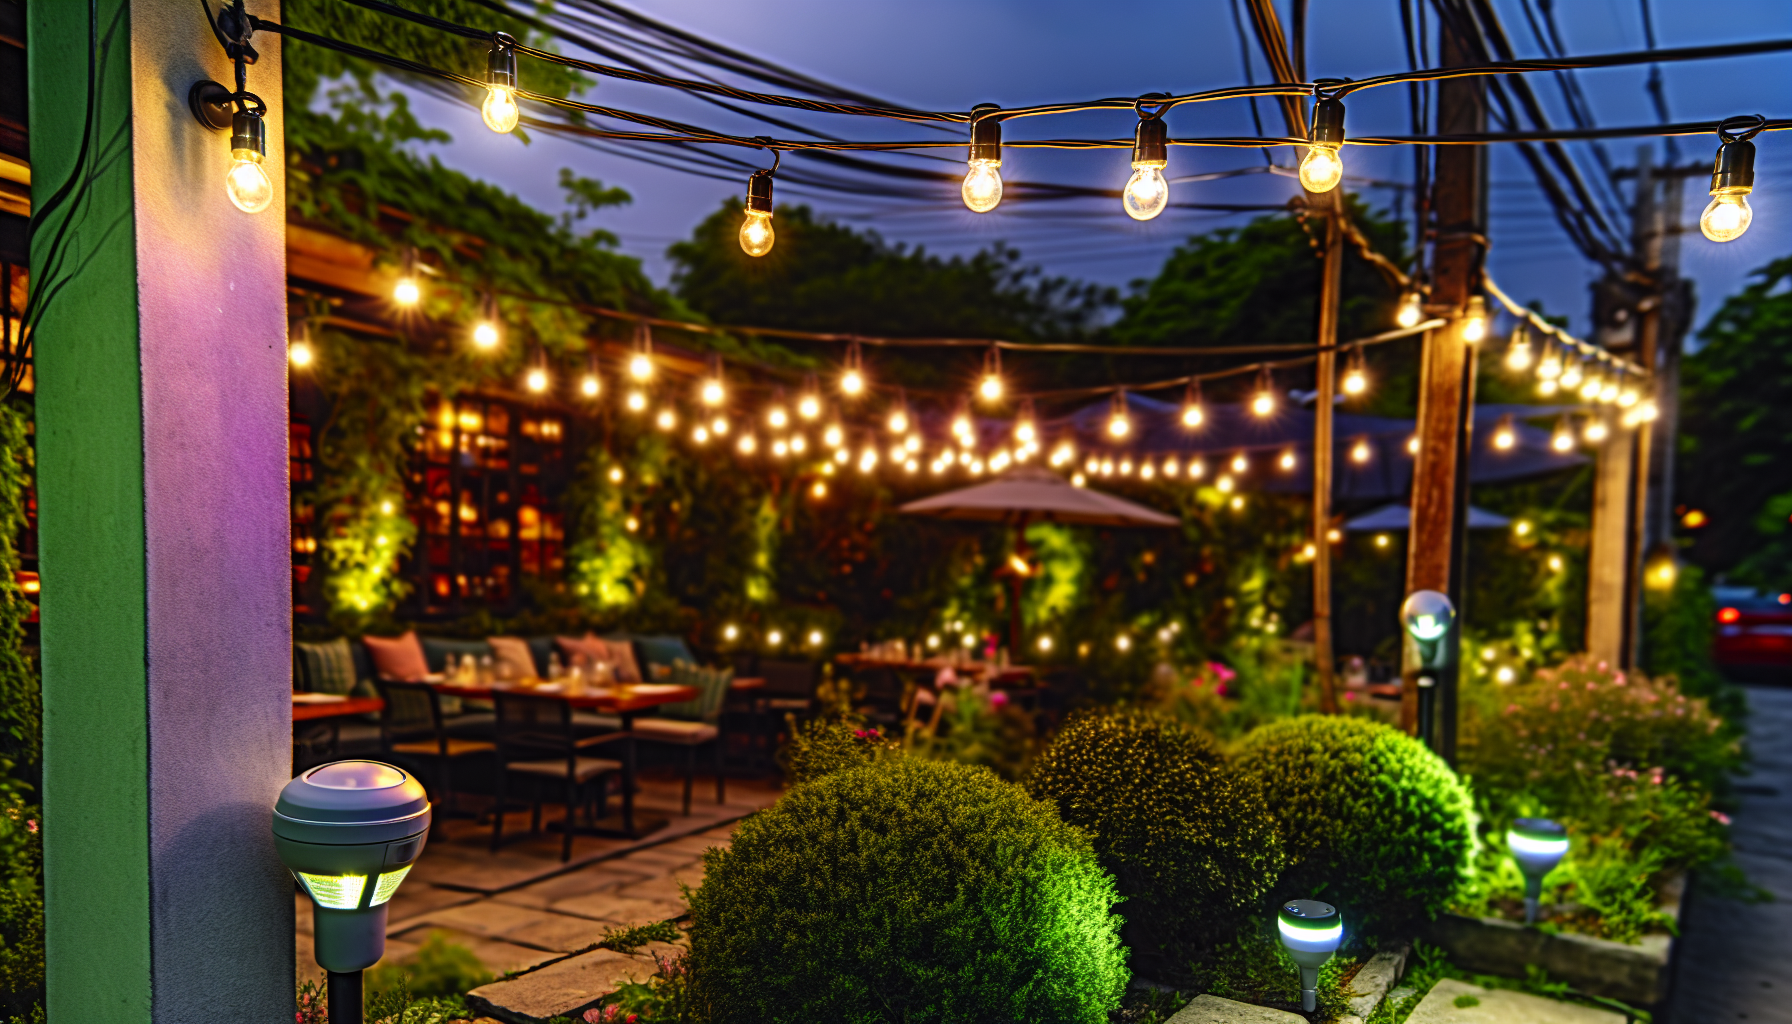 Inviting patio and garden lights creating a warm outdoor ambiance